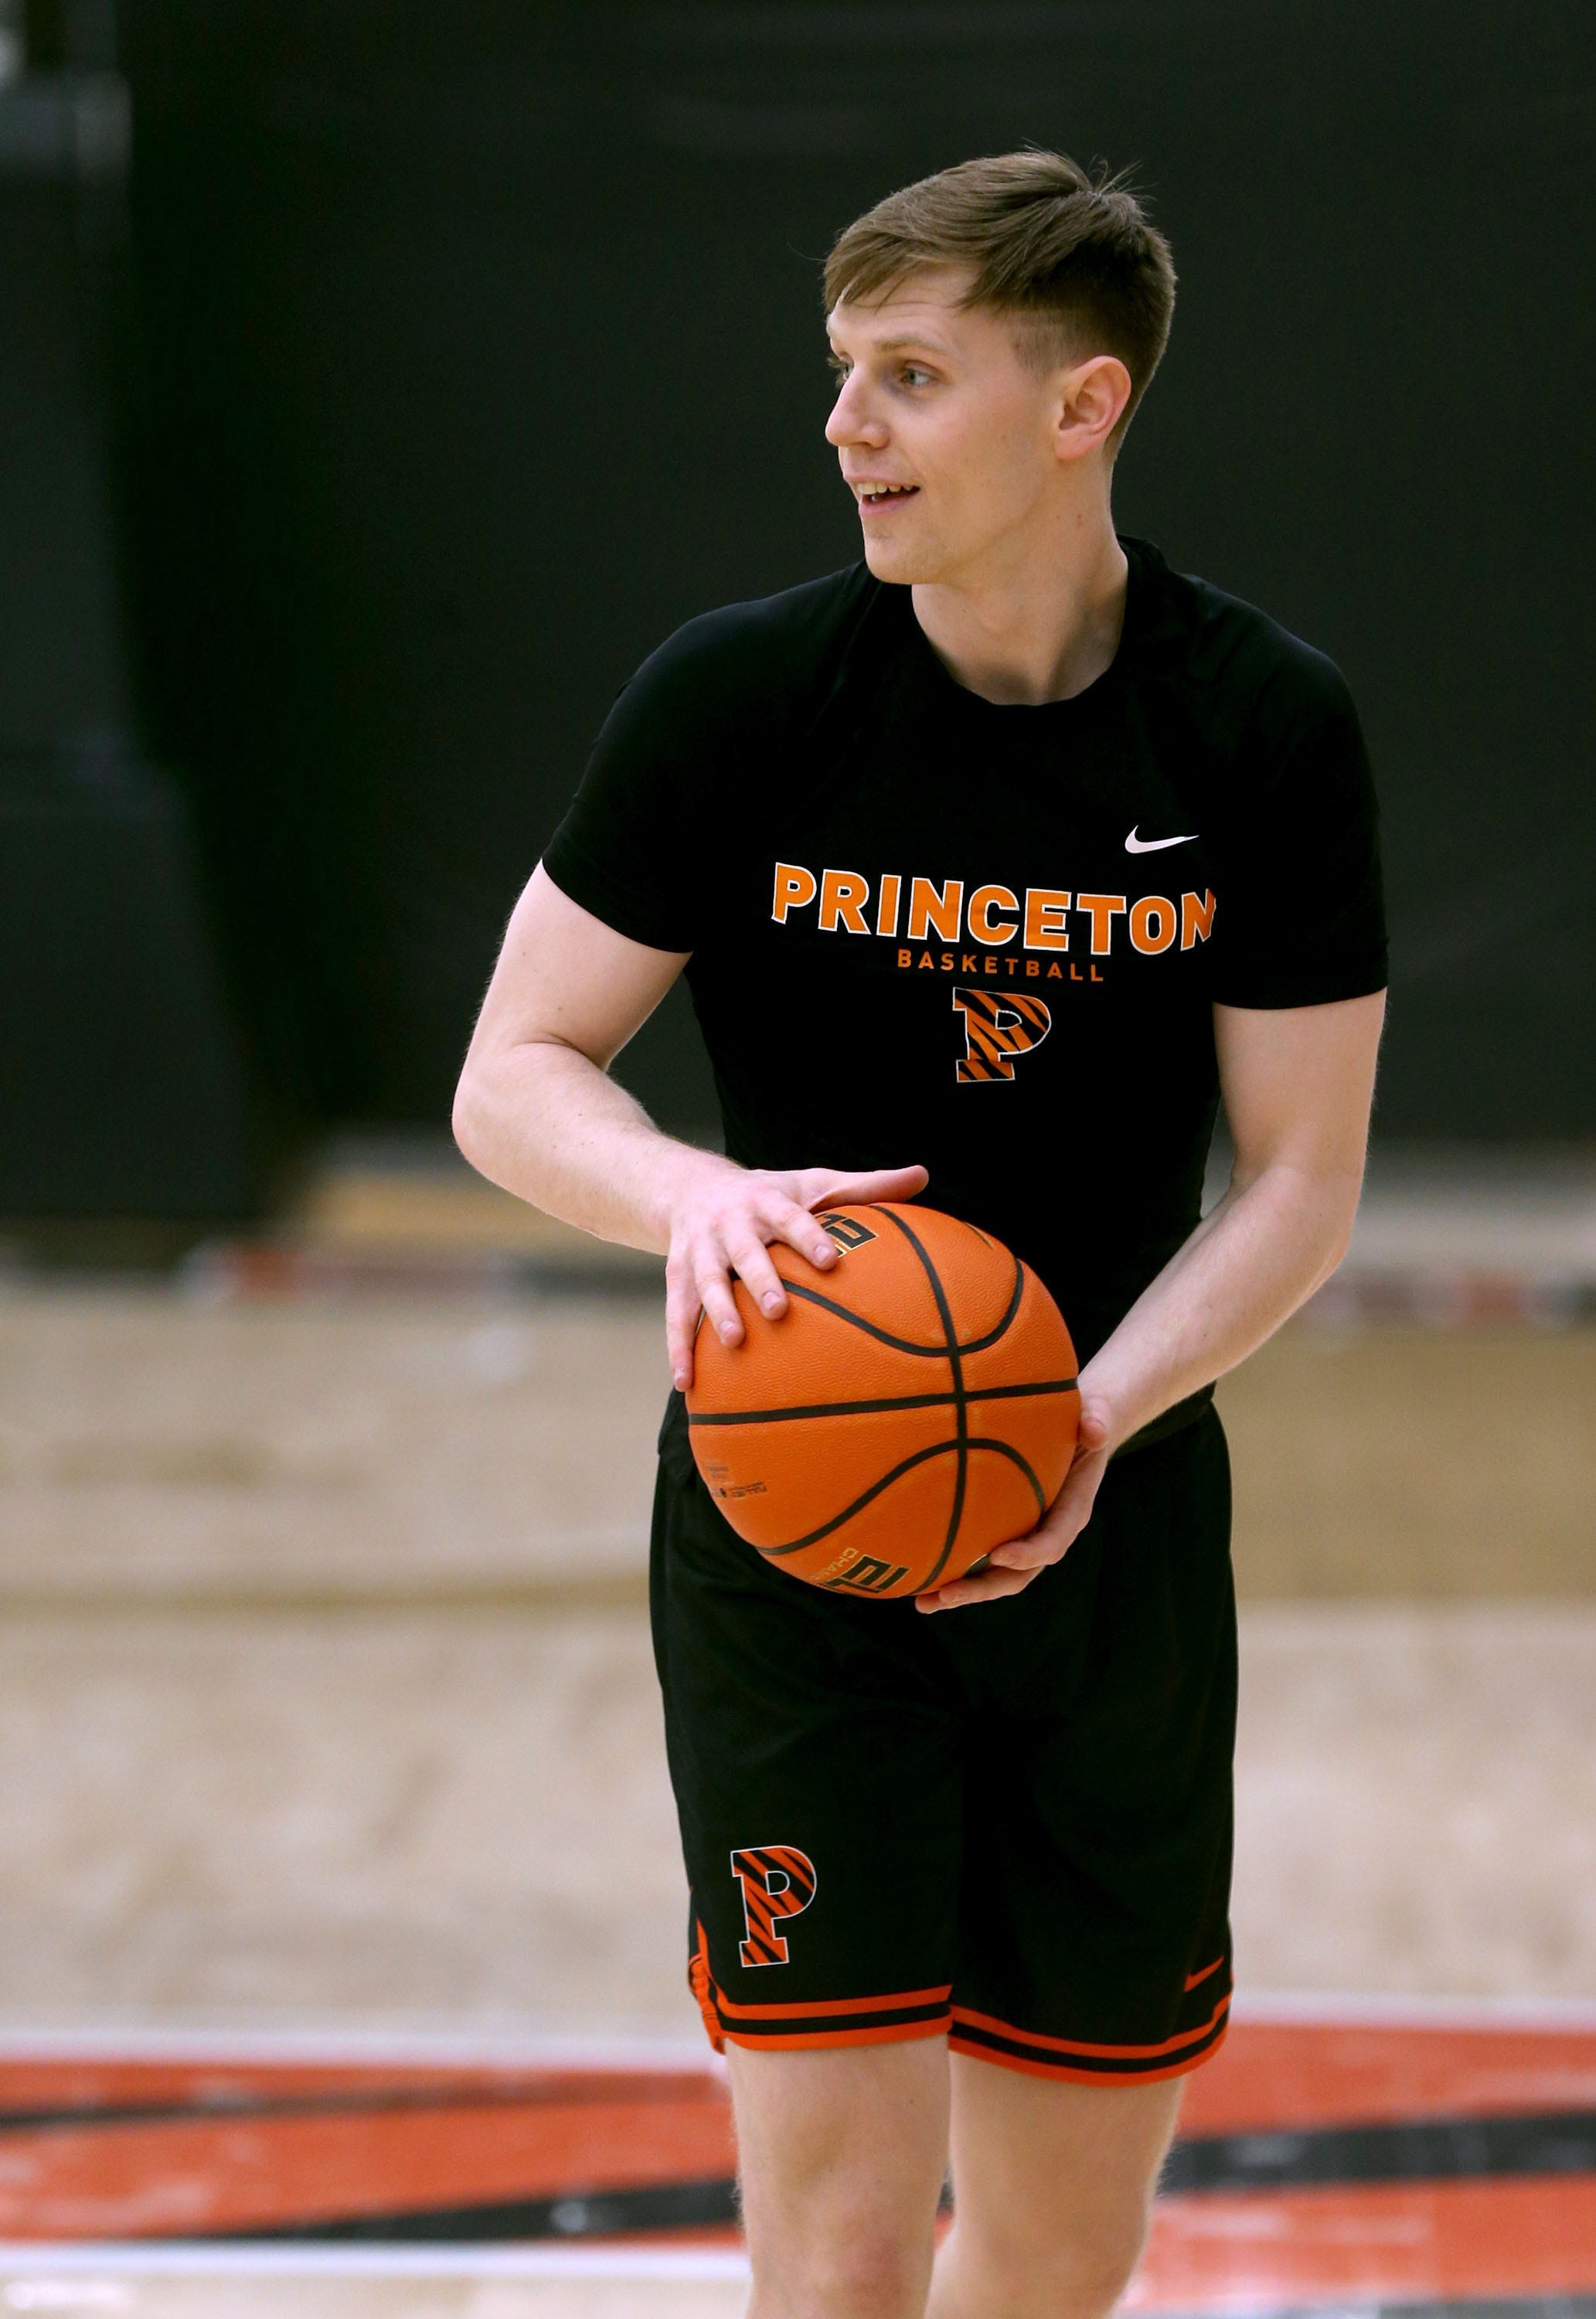 Princeton University Guard Matt Allocco on the court at the University's Jadwin Gym Monday afternoon, March 20, 2023. The team were preparing for their NCAA Sweet 16 appearance.

Basketball Princeton Men S Basketball Sweet 16 Team Practice